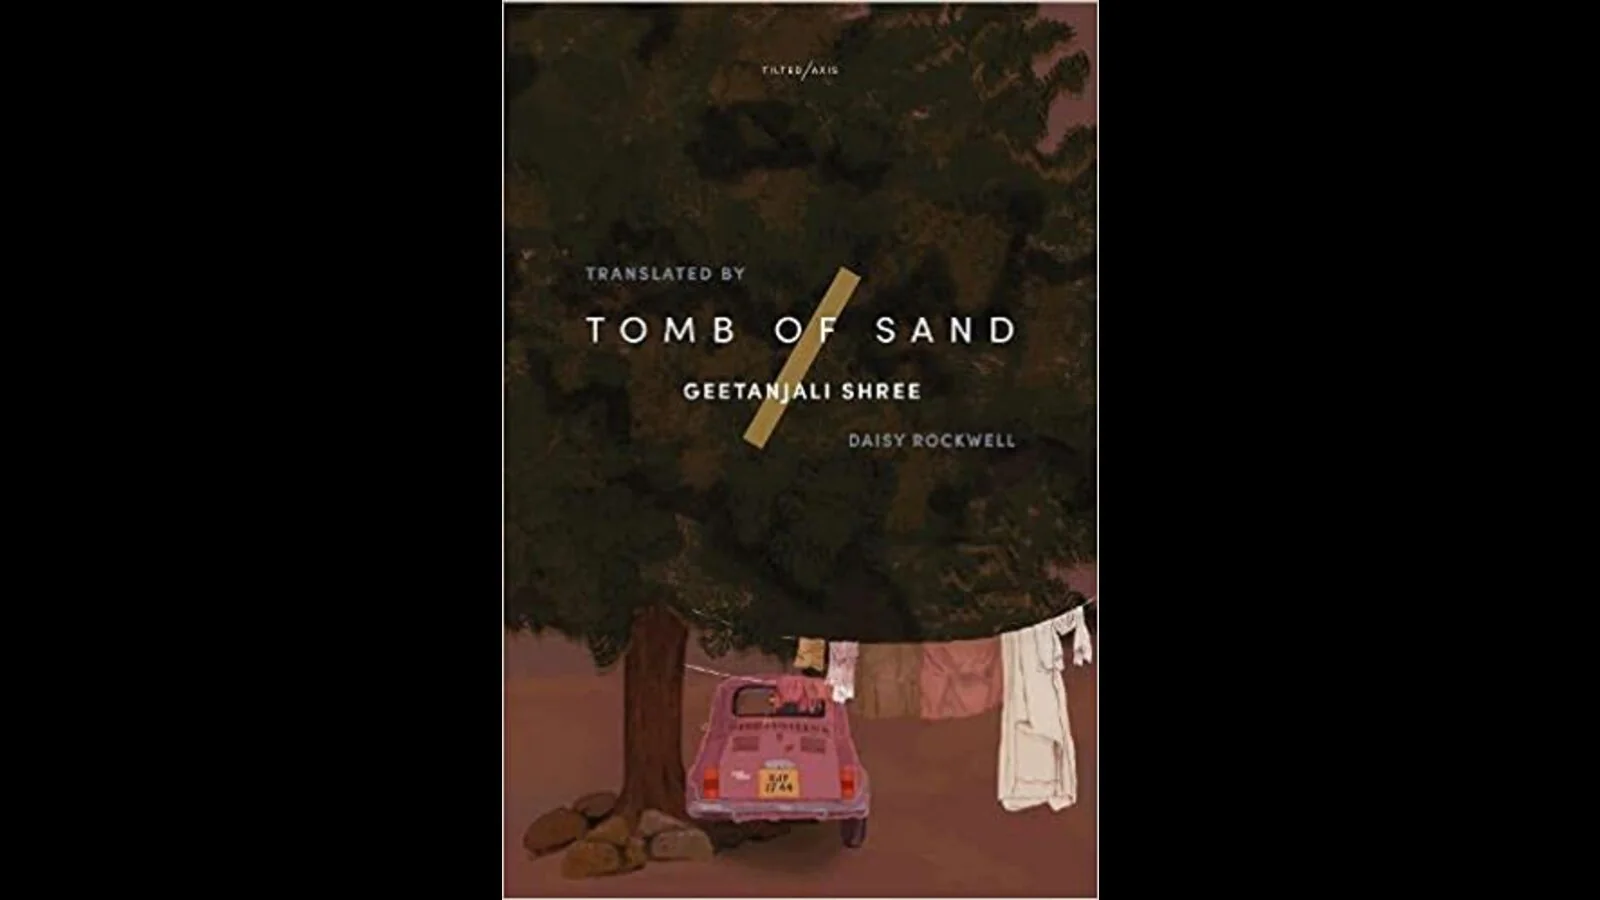 Read an exclusive excerpt from Geetanjali Shree’s Tomb of Sand